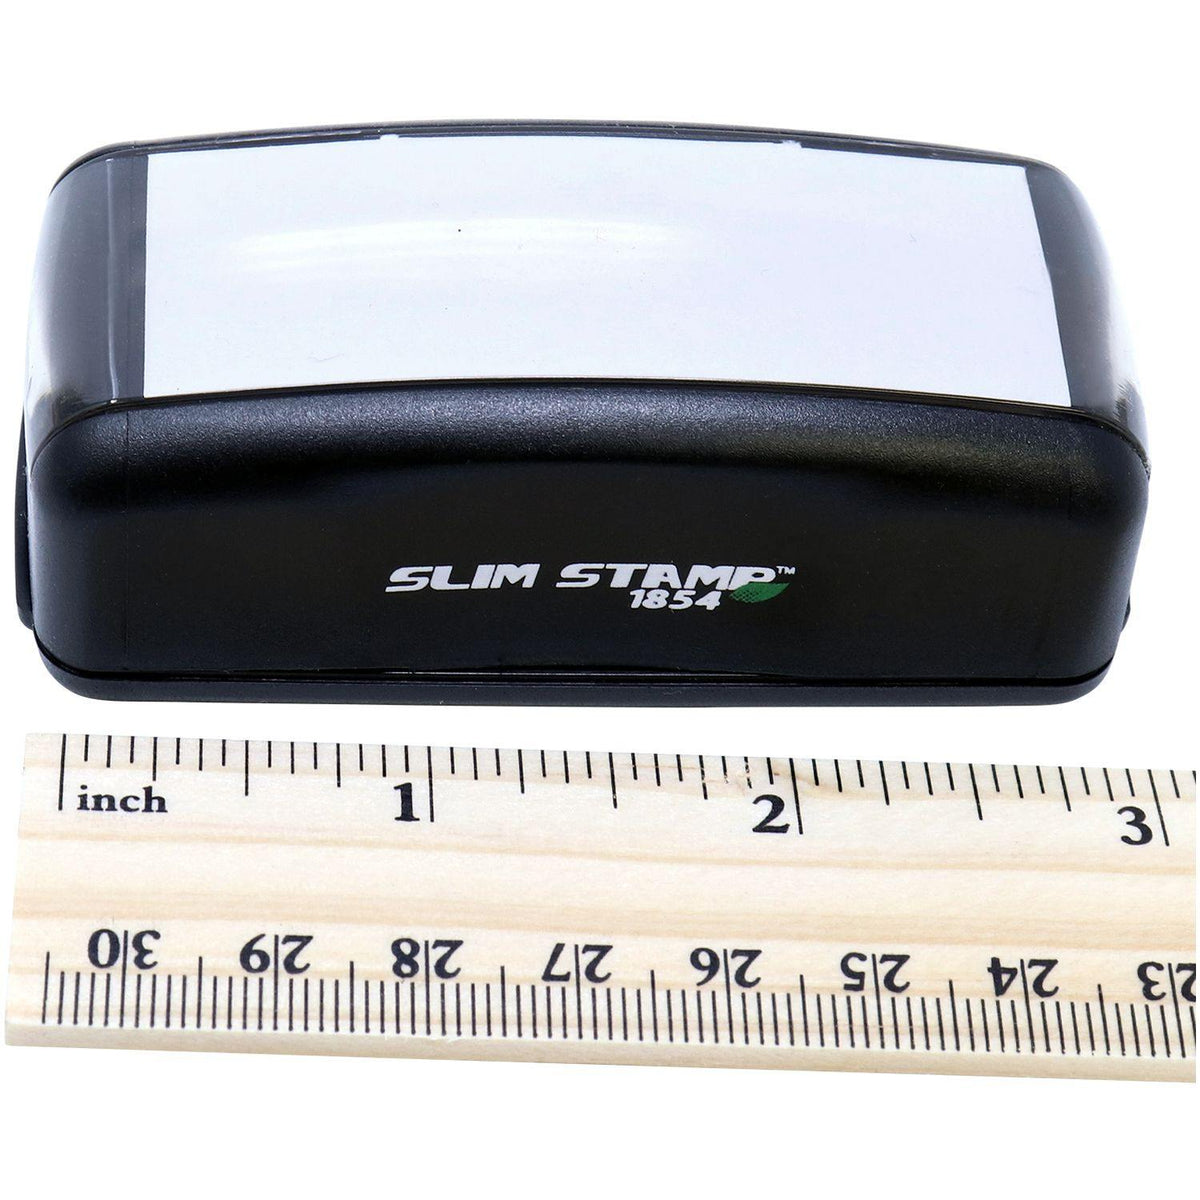 Measurement Large Pre Inked Closed Account Stamp with Ruler